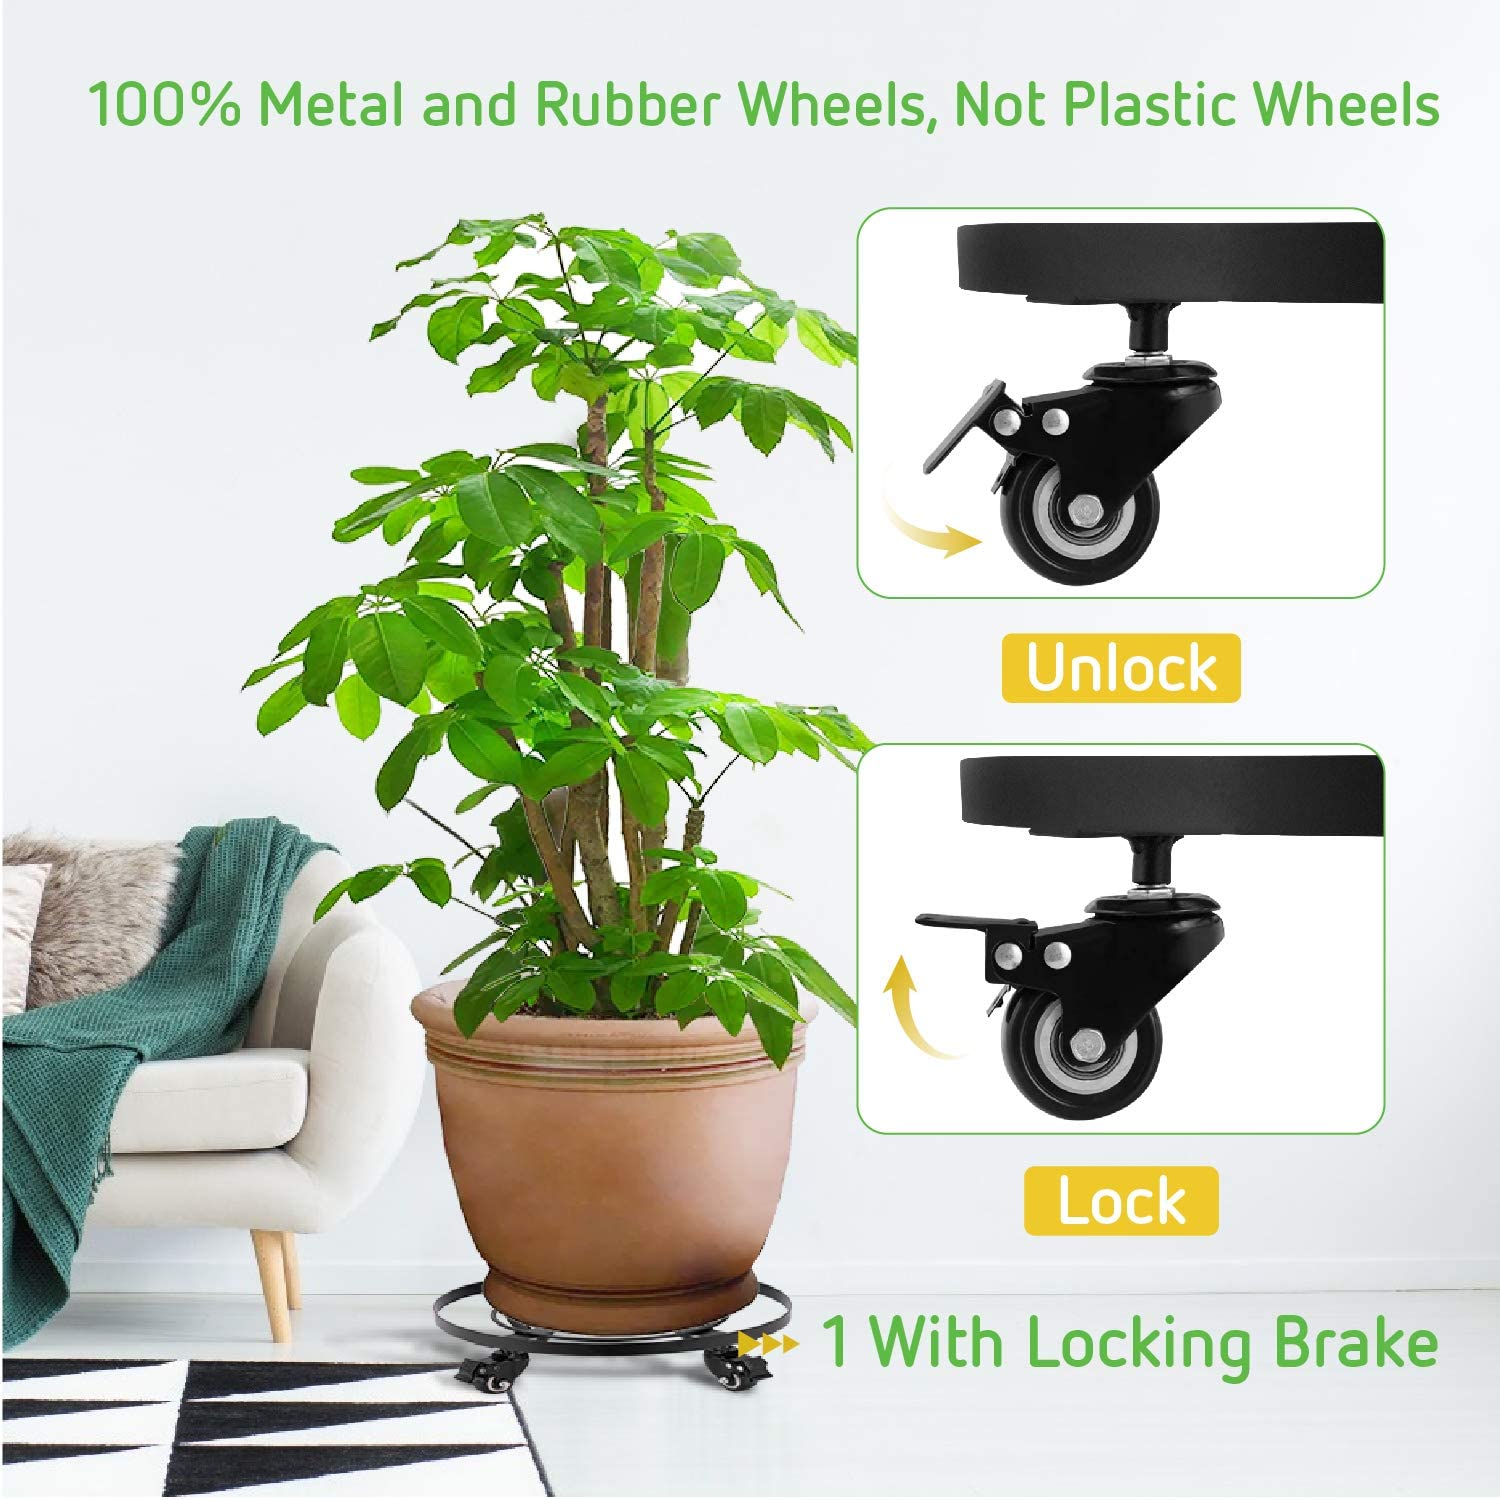 AMKOY Metal Round Flower Plant Pot Tray 4 Wheels Heavy Planter Flowers Pot Mover Trolley Plate Stand Holder Garden Tools